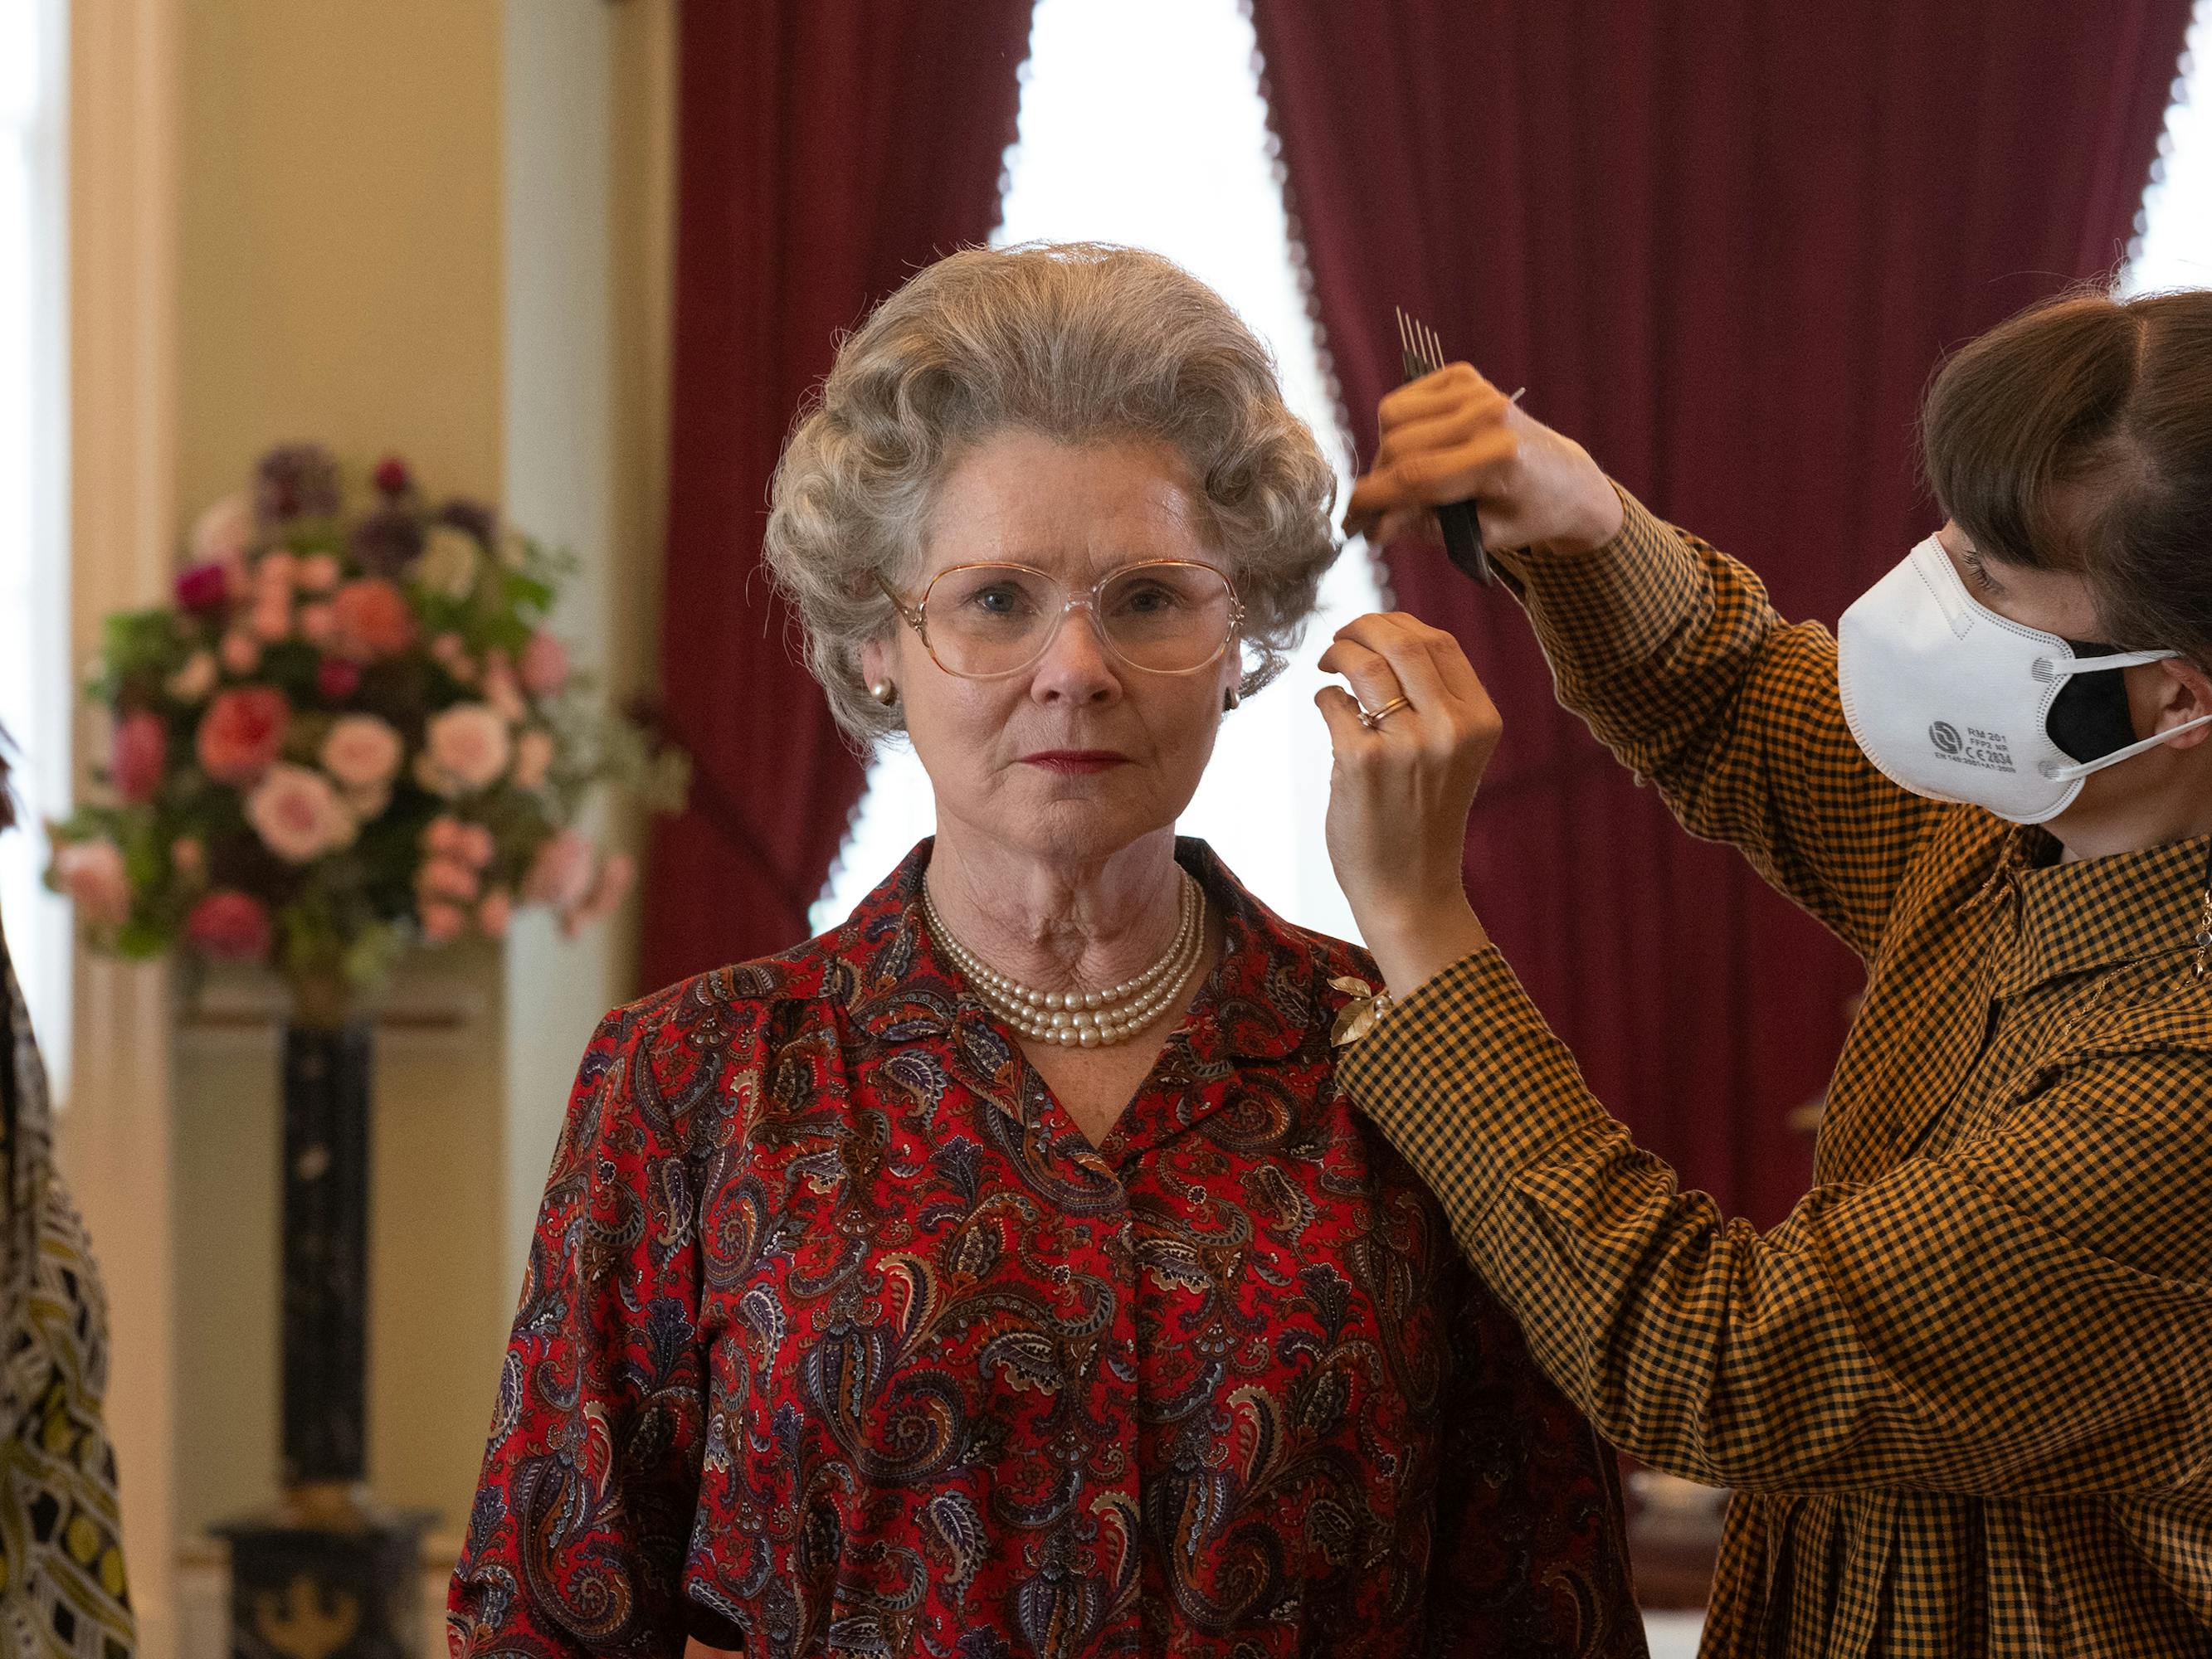 Imelda Staunton gets her hair touched up by someone in a mask. Staunton wears a red patterned shirt and looks straight ahead.